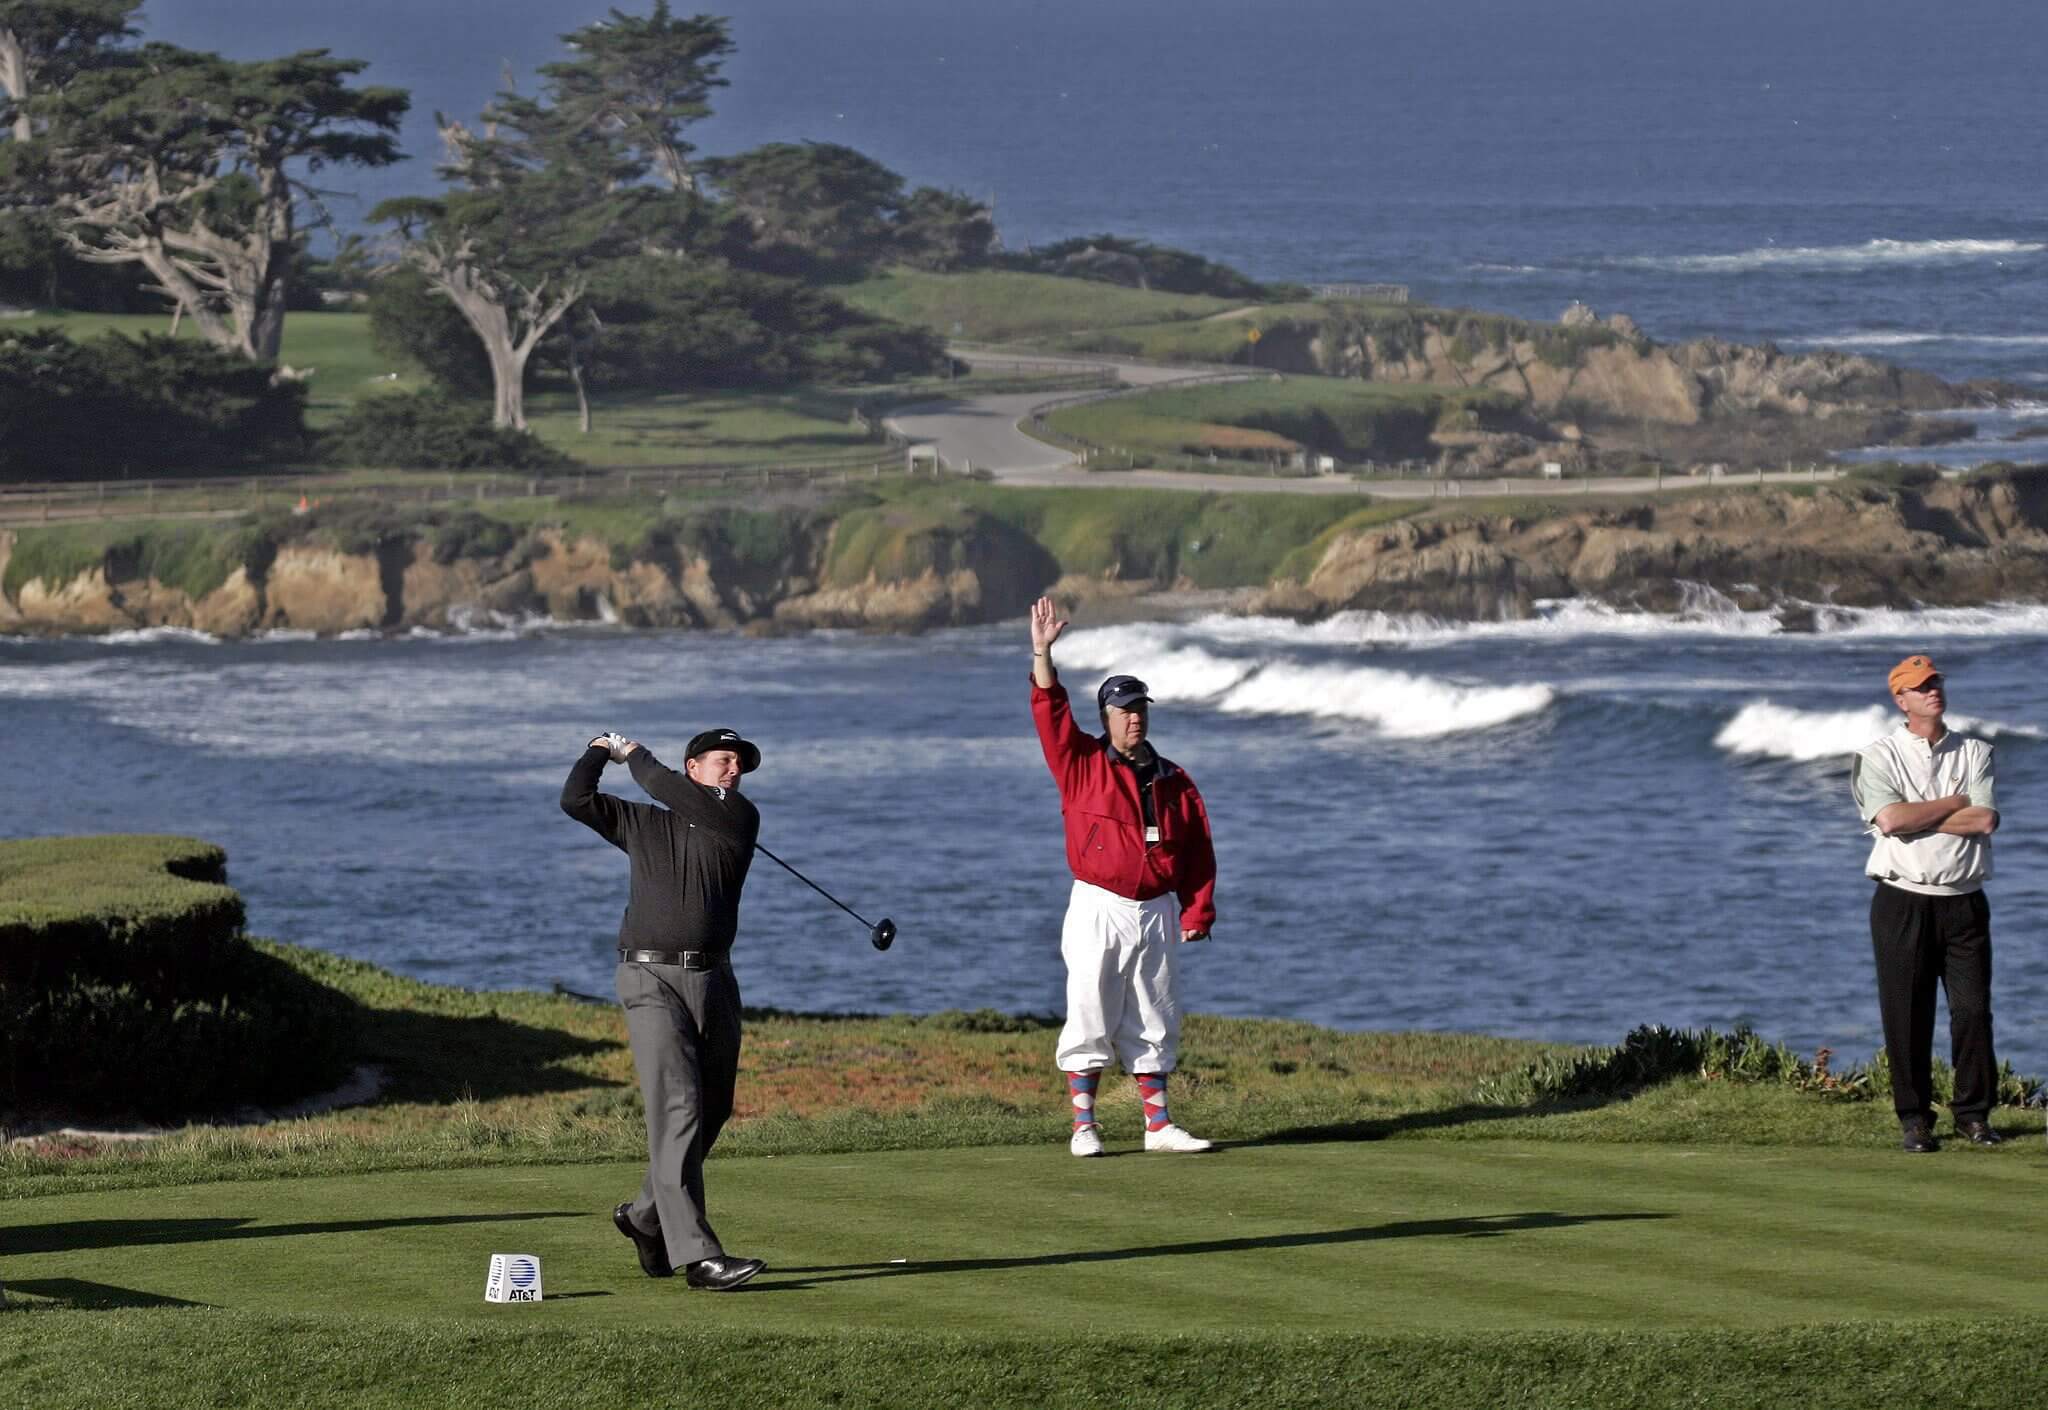 Cypress Point Provides the Background As Phil Mickelson Tees-off On the 4th Hole at Spyglass Hill Golf Course During the First Round of the Pebble Beach National Pro-am in Pebble Beach California Thursday 10 February 2005 Standing at Right is Mickelson's Amateur Partner Steve Lyons